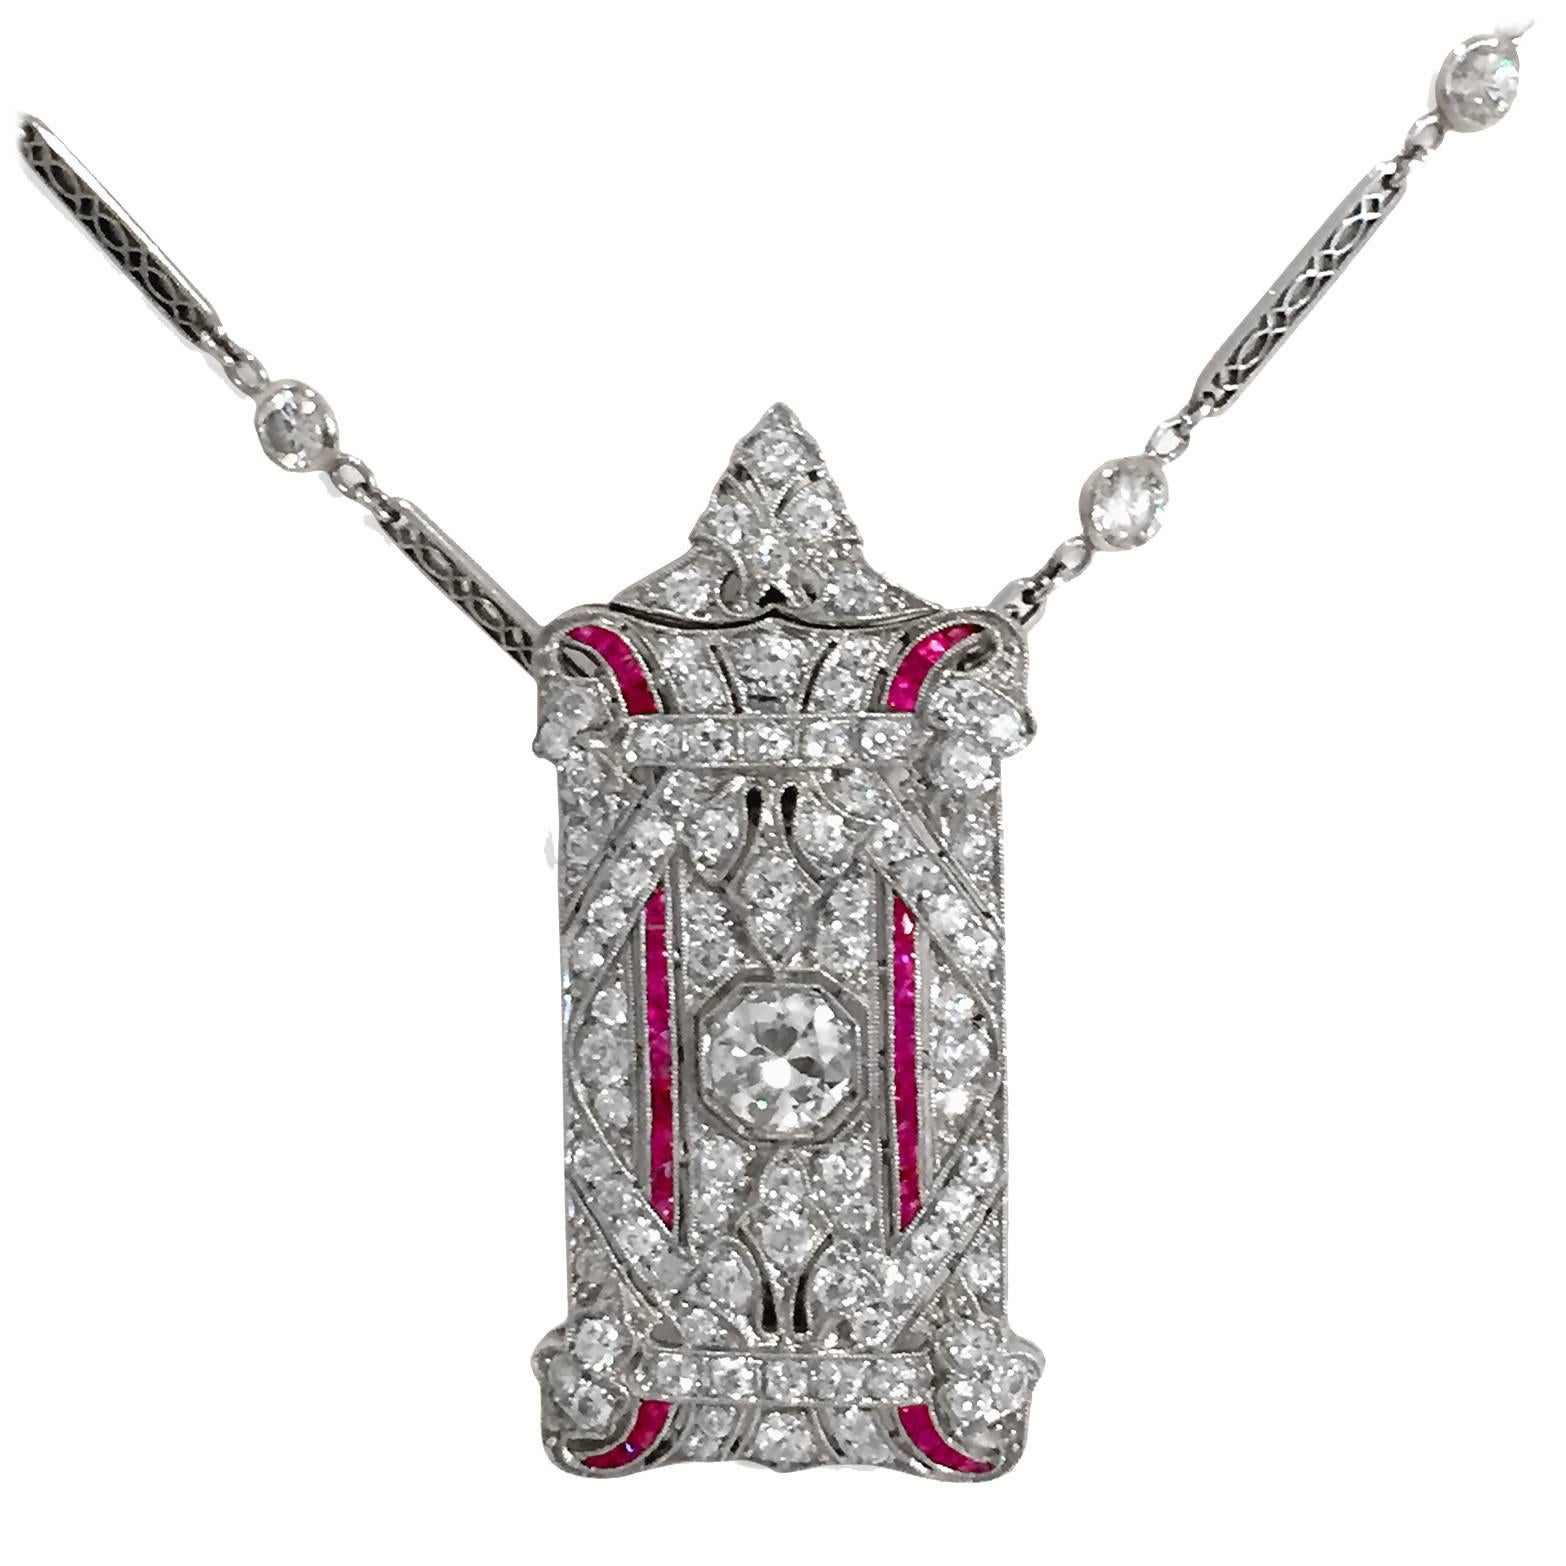 An art deco classic — 4 carats in total of diamonds, with a center old mine-cut diamond of 1 carat H color VS grade, plus an additional 3 carats of diamonds and generous trimmings of princess-cut rubies. Top bail unscrews so the pendant can be worn